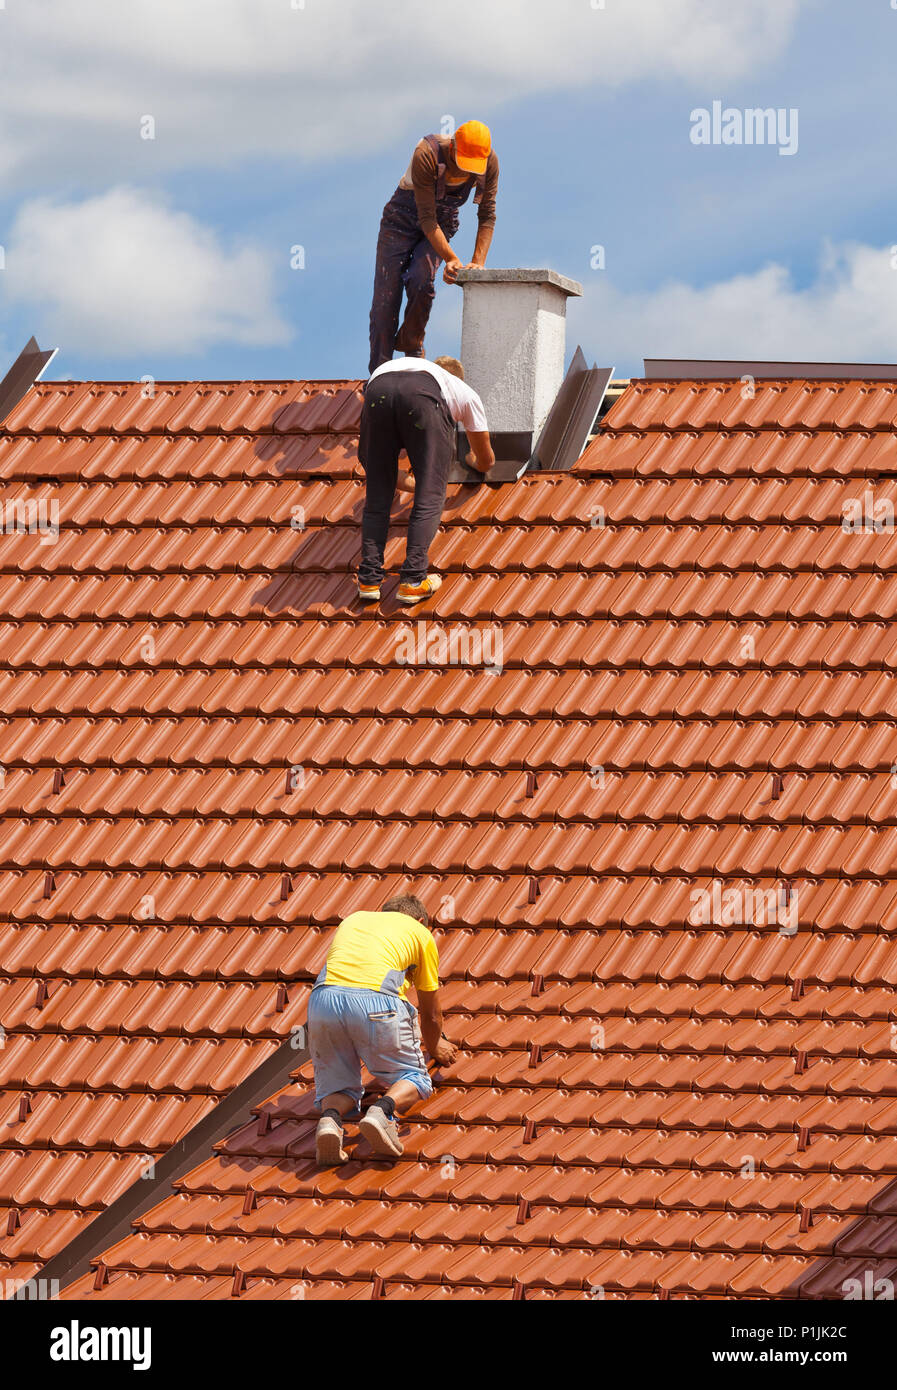 Men Working On A Roof Stock Photos Men Working On A Roof Stock